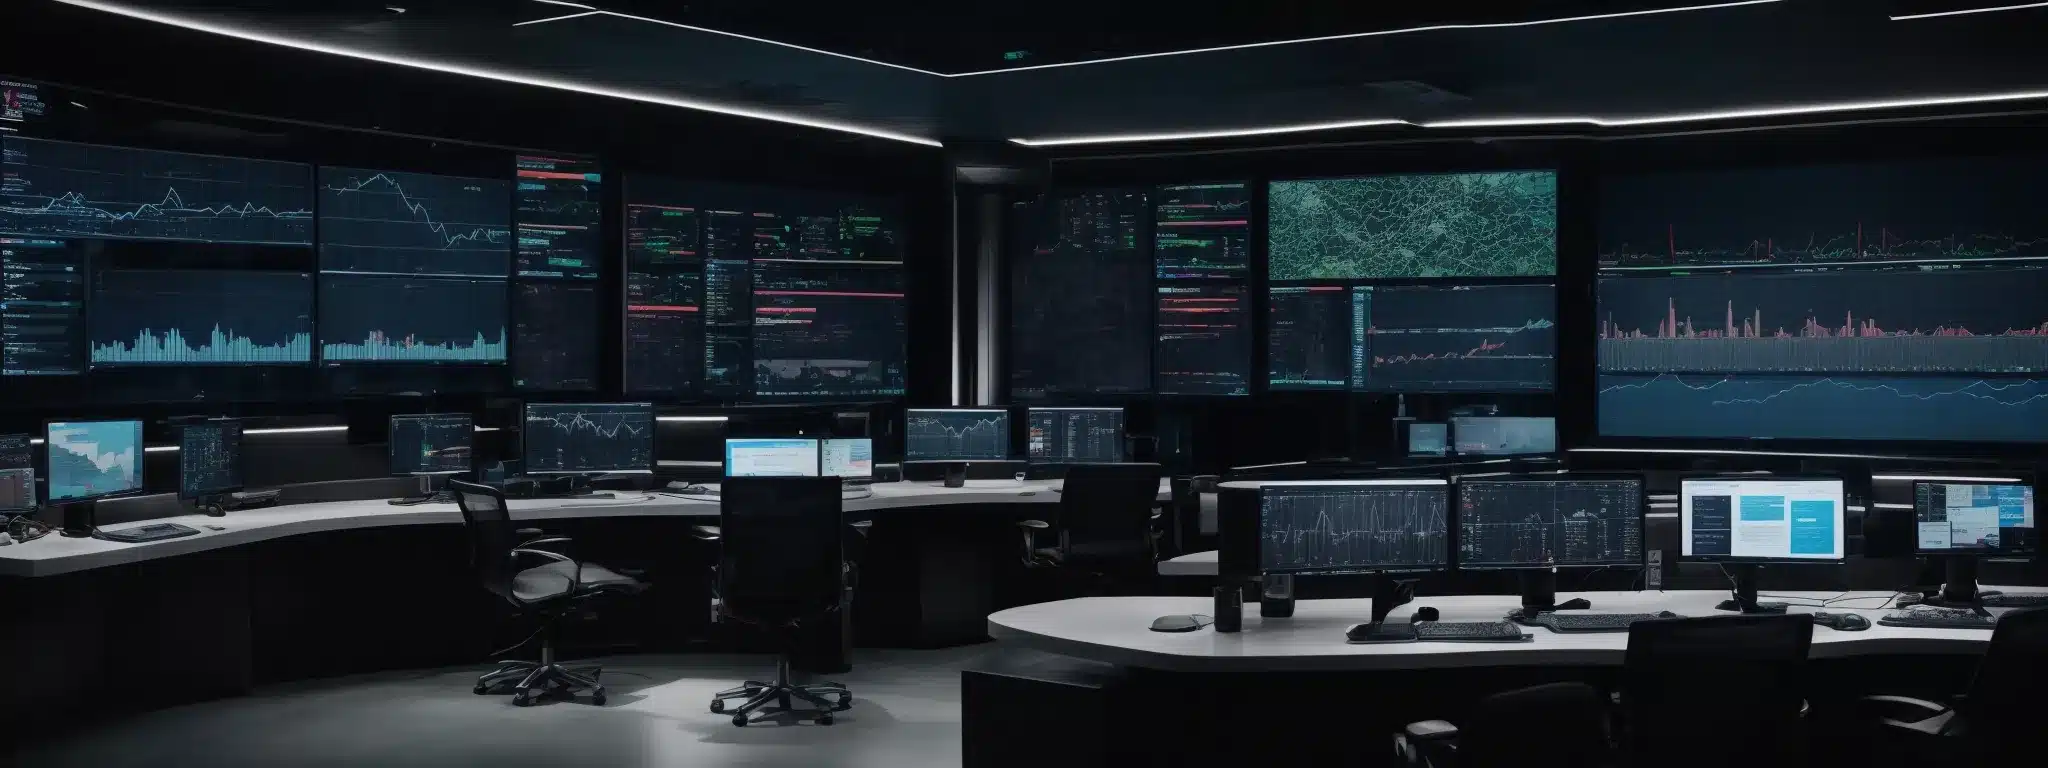 A Sleek, High-Tech Command Center, Where Screens Display Graphs And Analytics, Symbolizing The Synergy Of Crm And Marketing Platforms.